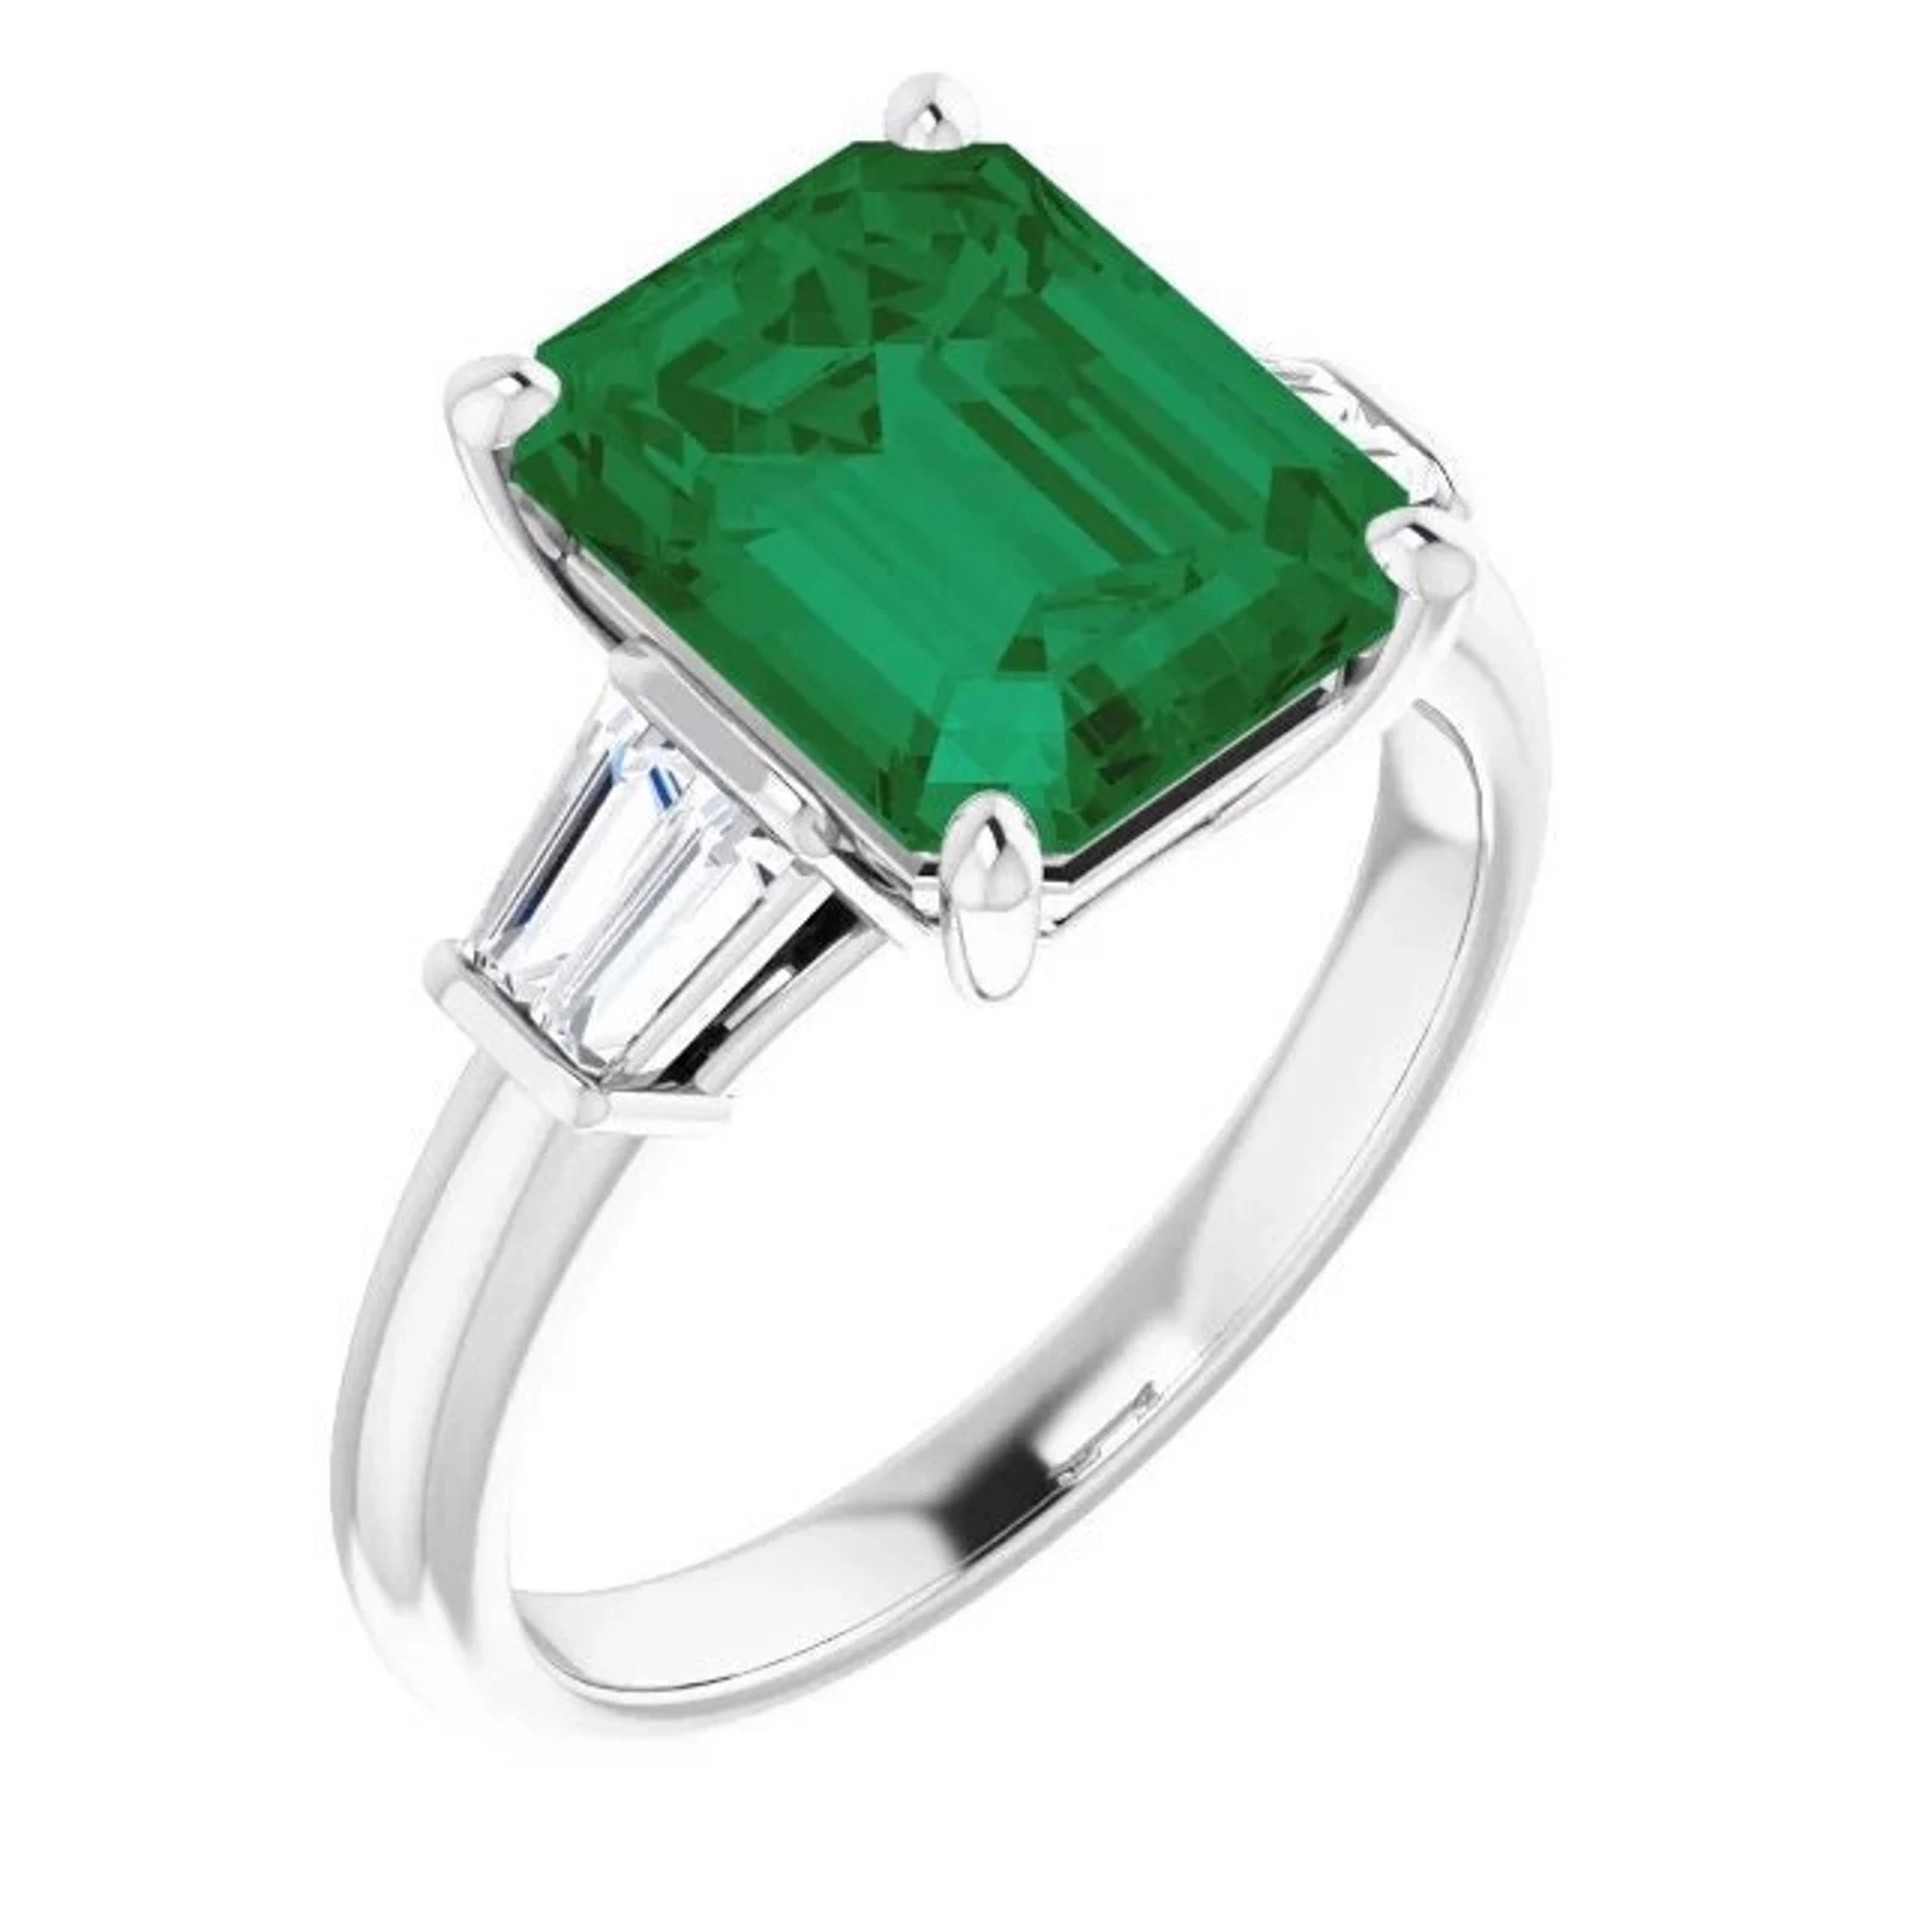 Gorgeous 3ct Lab Grown Emerald and Diamond Ring by Carley Jewels